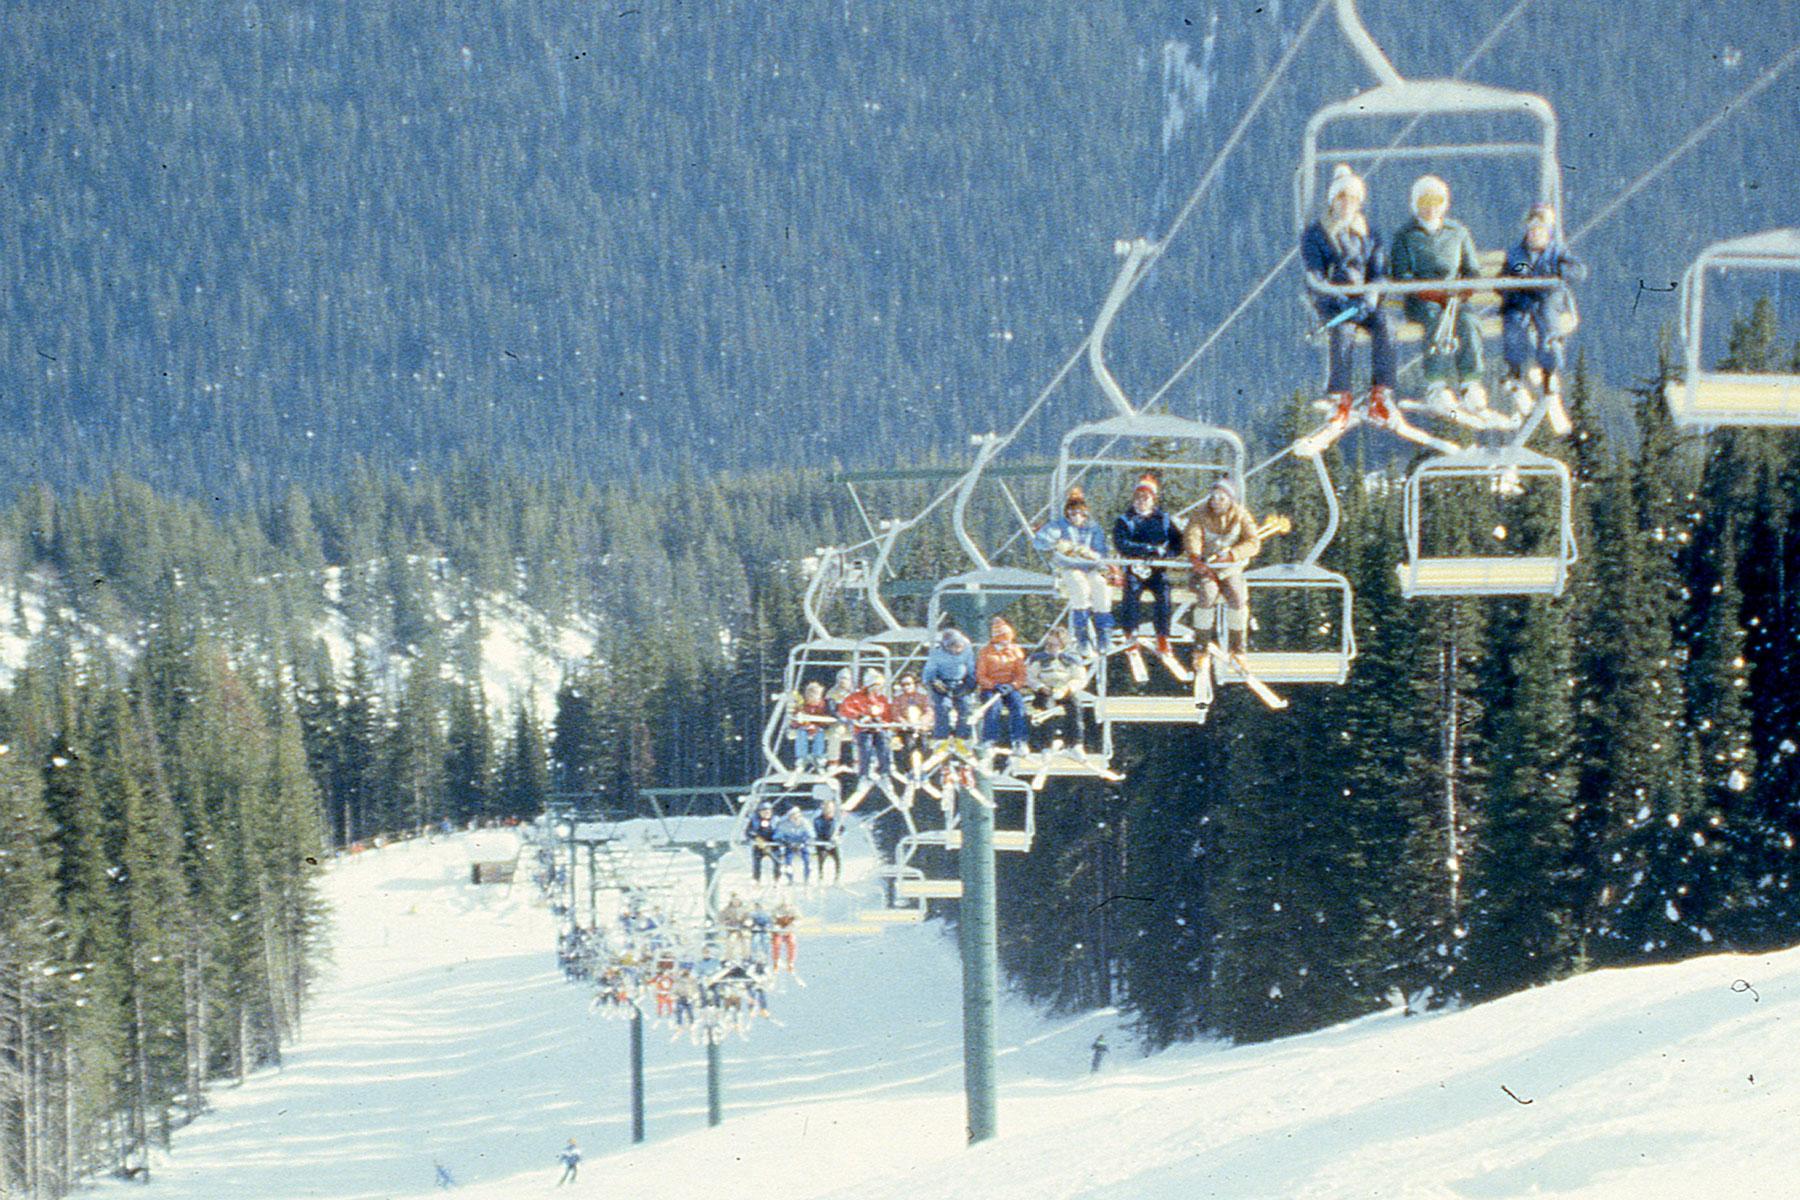 Historical photo of the Crystal chair at Sun Peaks Resort BC